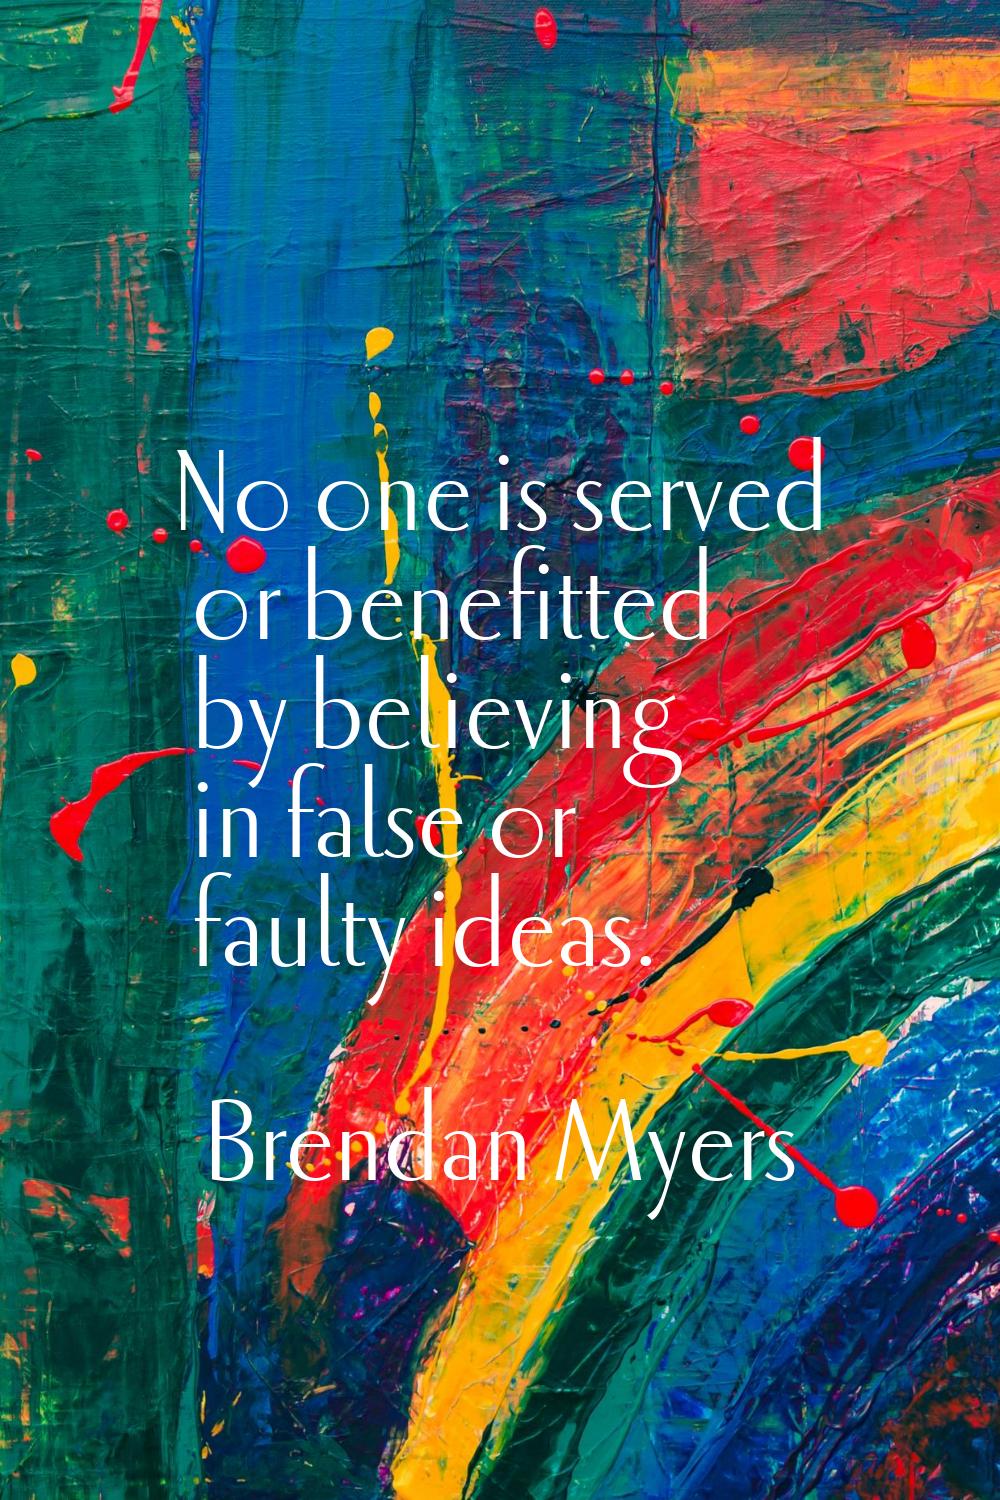 No one is served or benefitted by believing in false or faulty ideas.